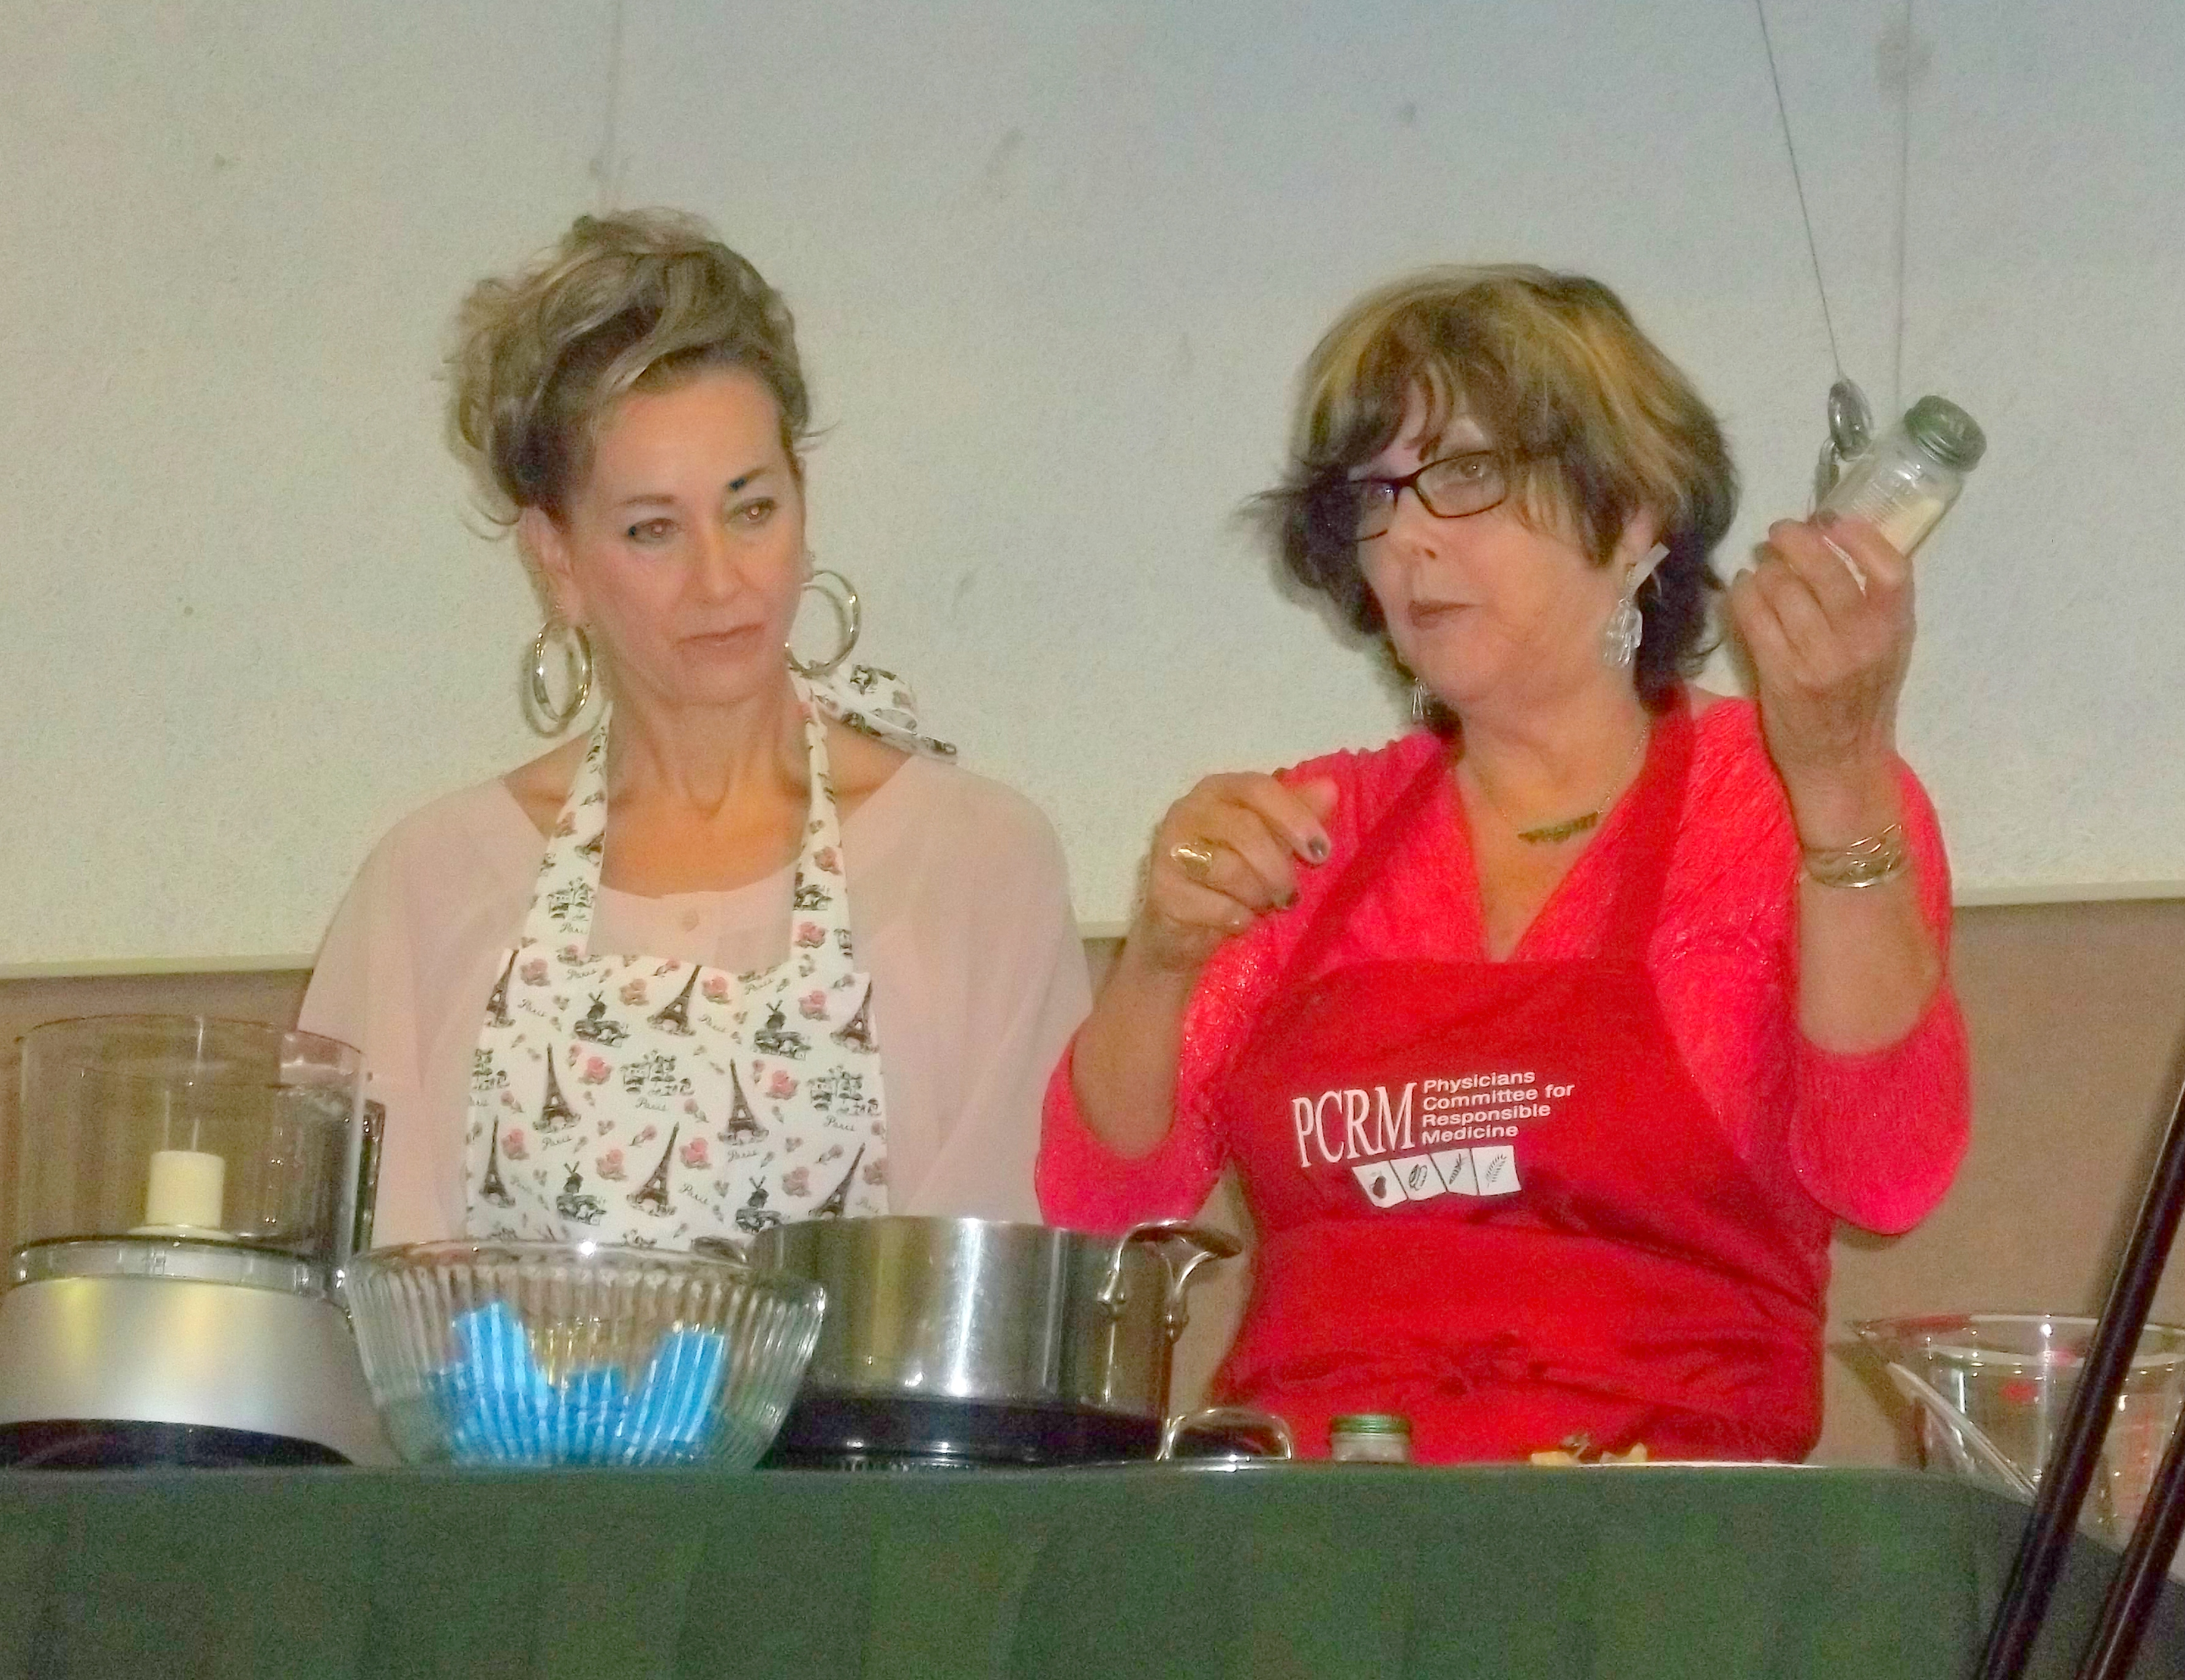 Linda Middlesworth demonstrated easy preparation of Blueberry Muffins and Caulfiflower Cheese Sauce - all without oil or animal products - for delicious results